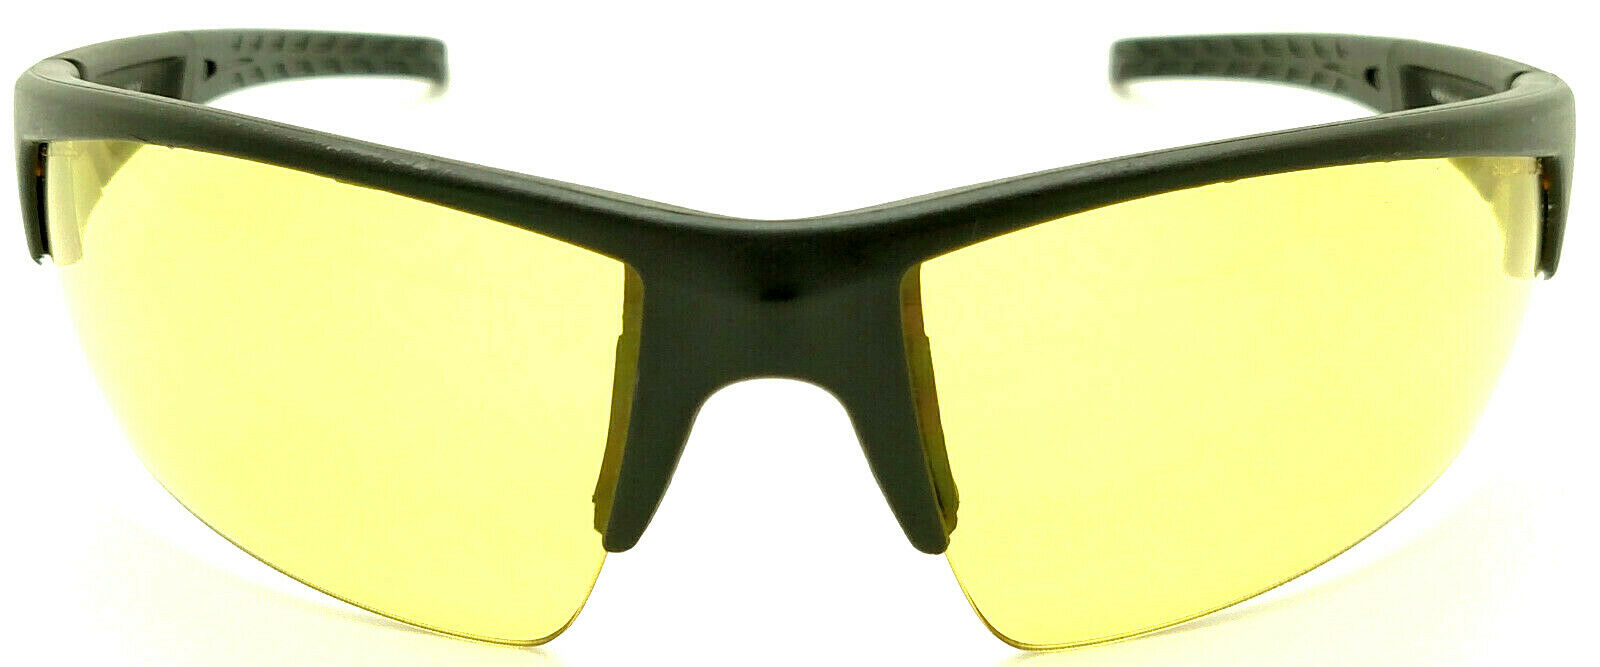 Shooter's Edge Z87.1 Safety Shooting Glasses Contrast Yellow lens Black frame